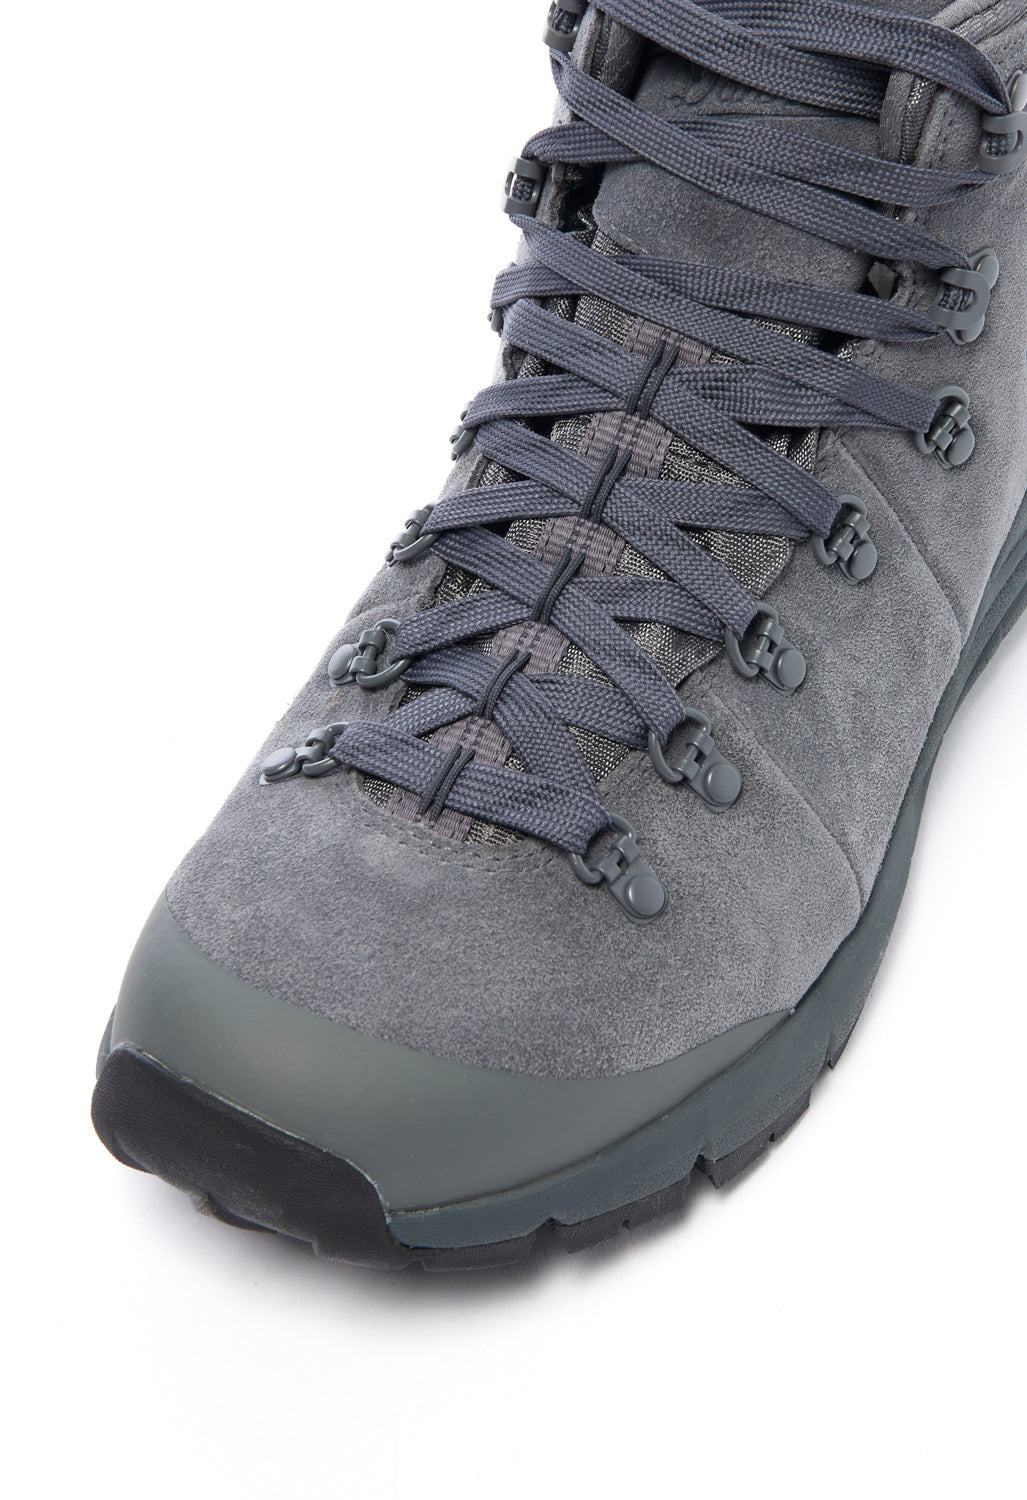 Danner Men's Mountain 600 Boots - Smoked Pearl